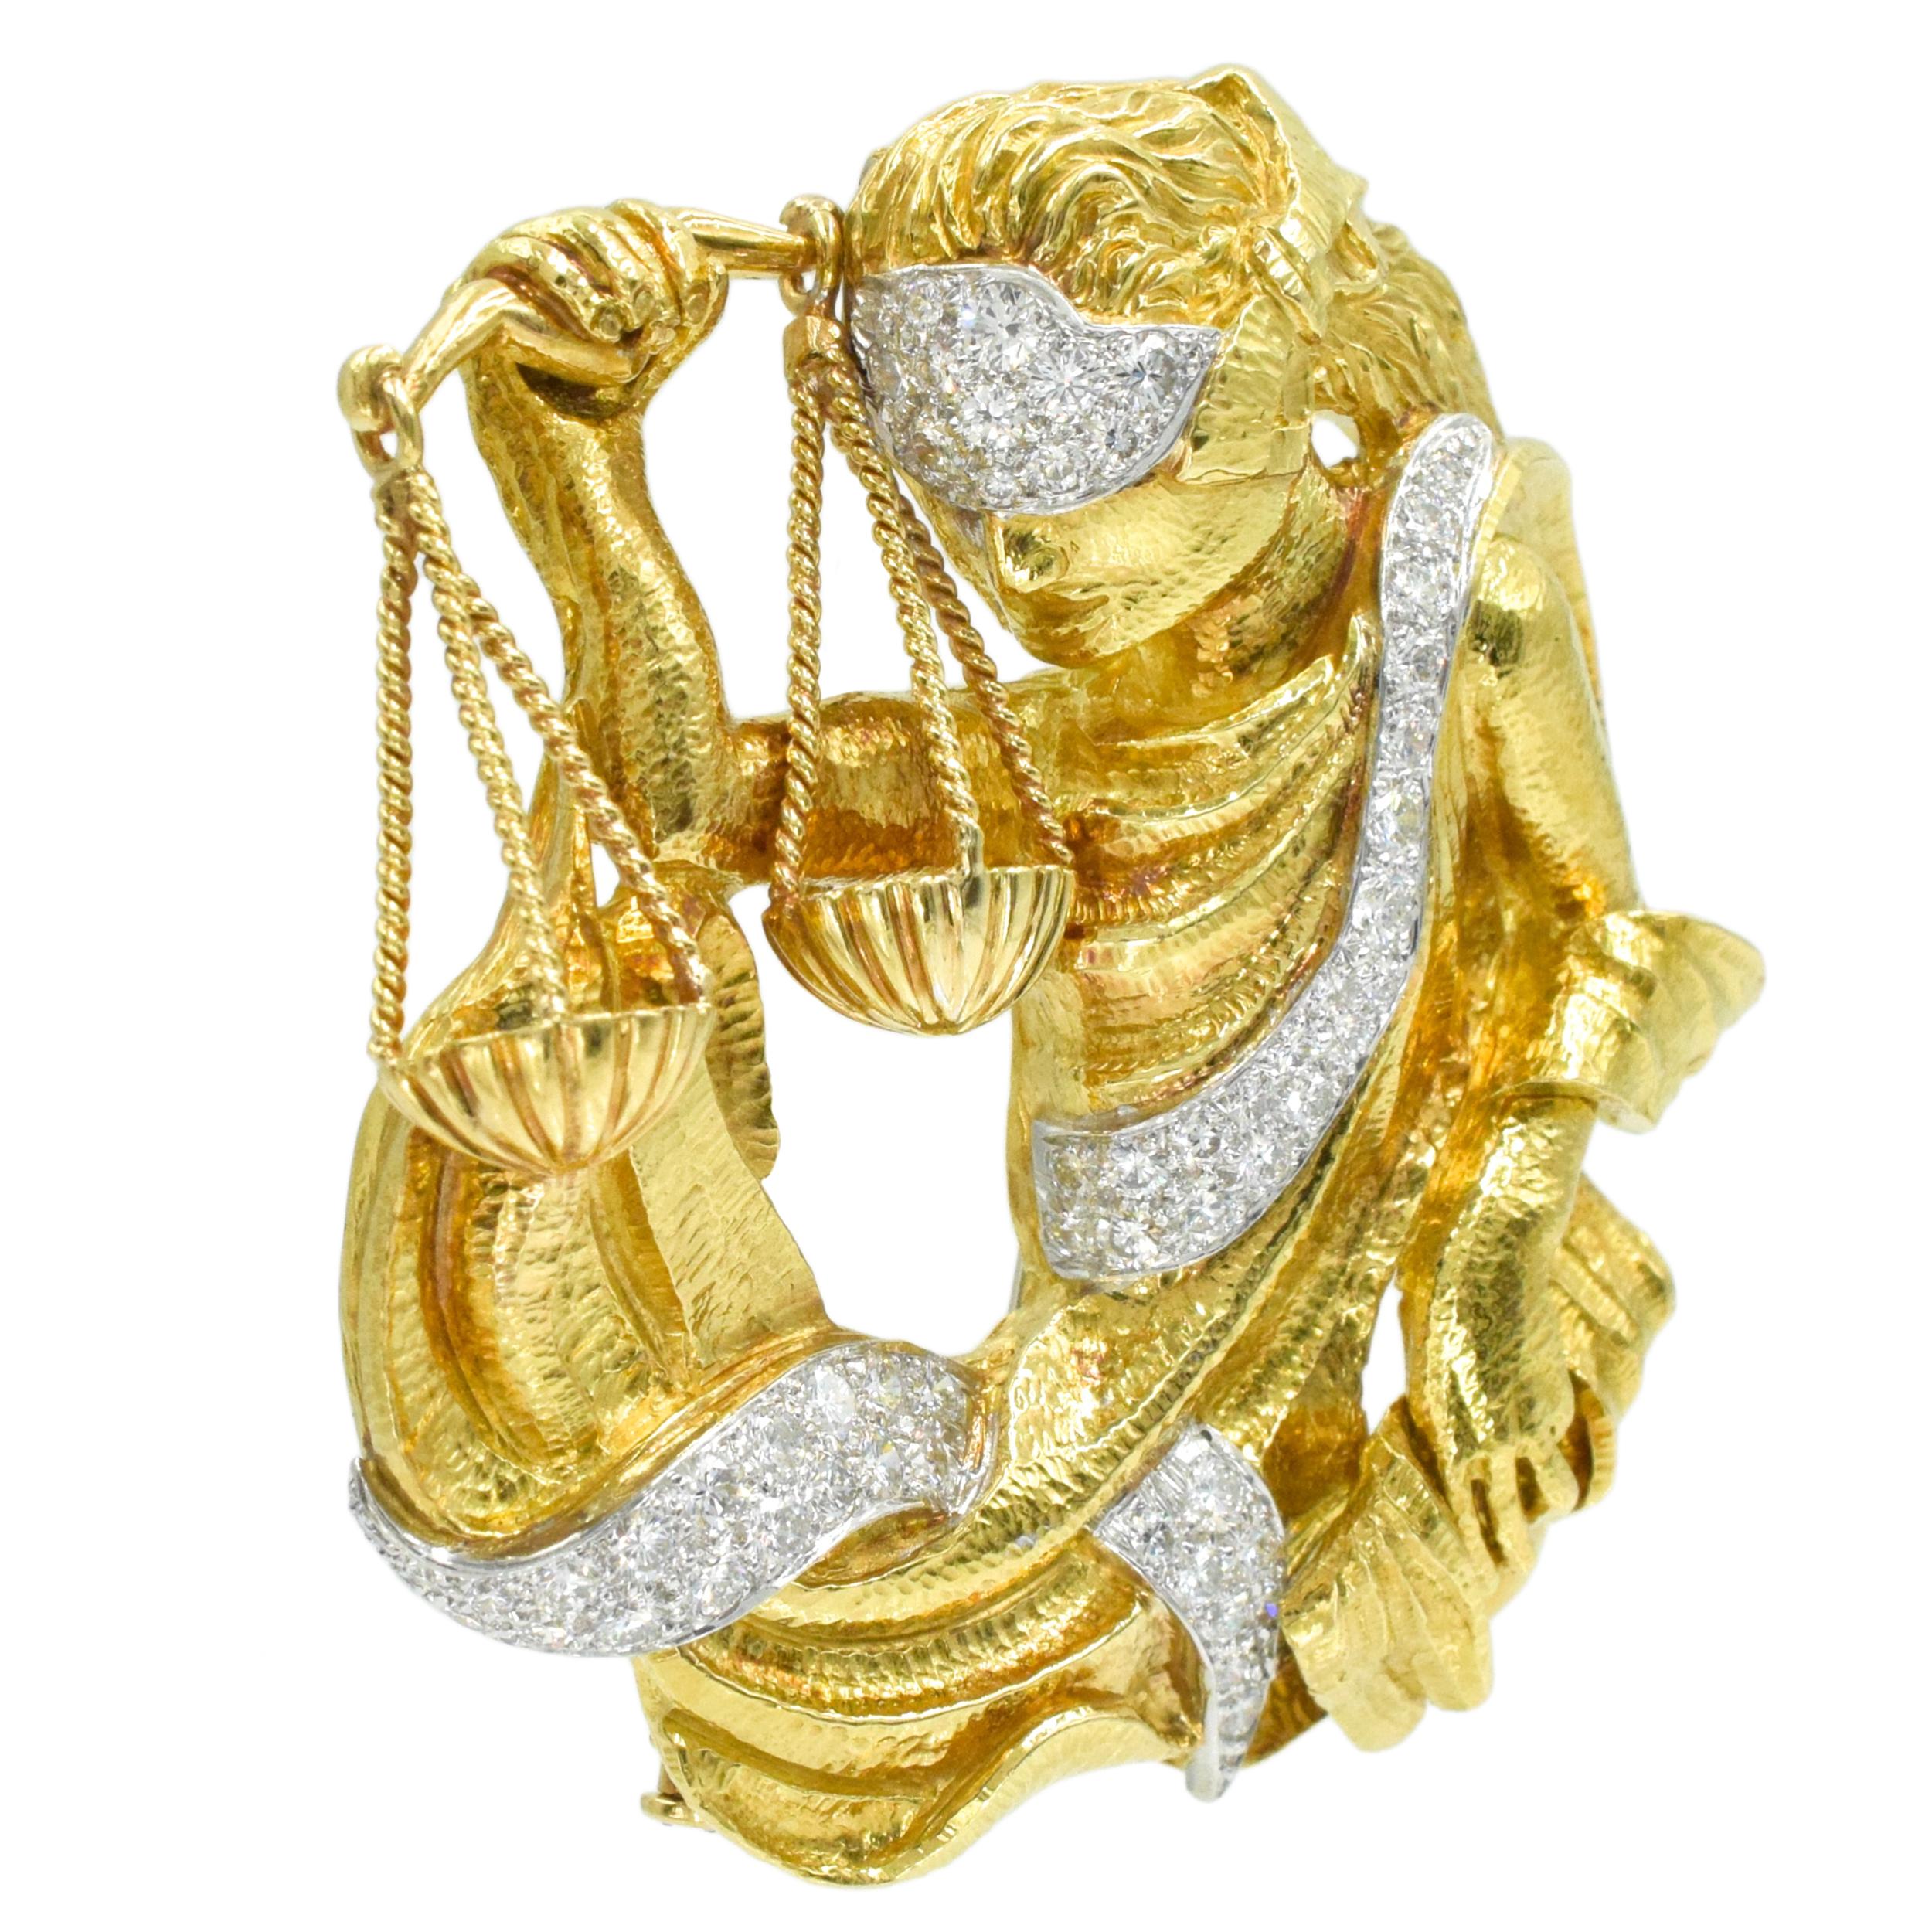 David Webb 18k yellow gold, platinum Lady Justice brooch.  This brooch features 18k yellow gold blin Lady Justice holding the scale in her right hand, wrapped in platinum scarf
encrusted with 55 round brilliant cut diamonds weighing total of